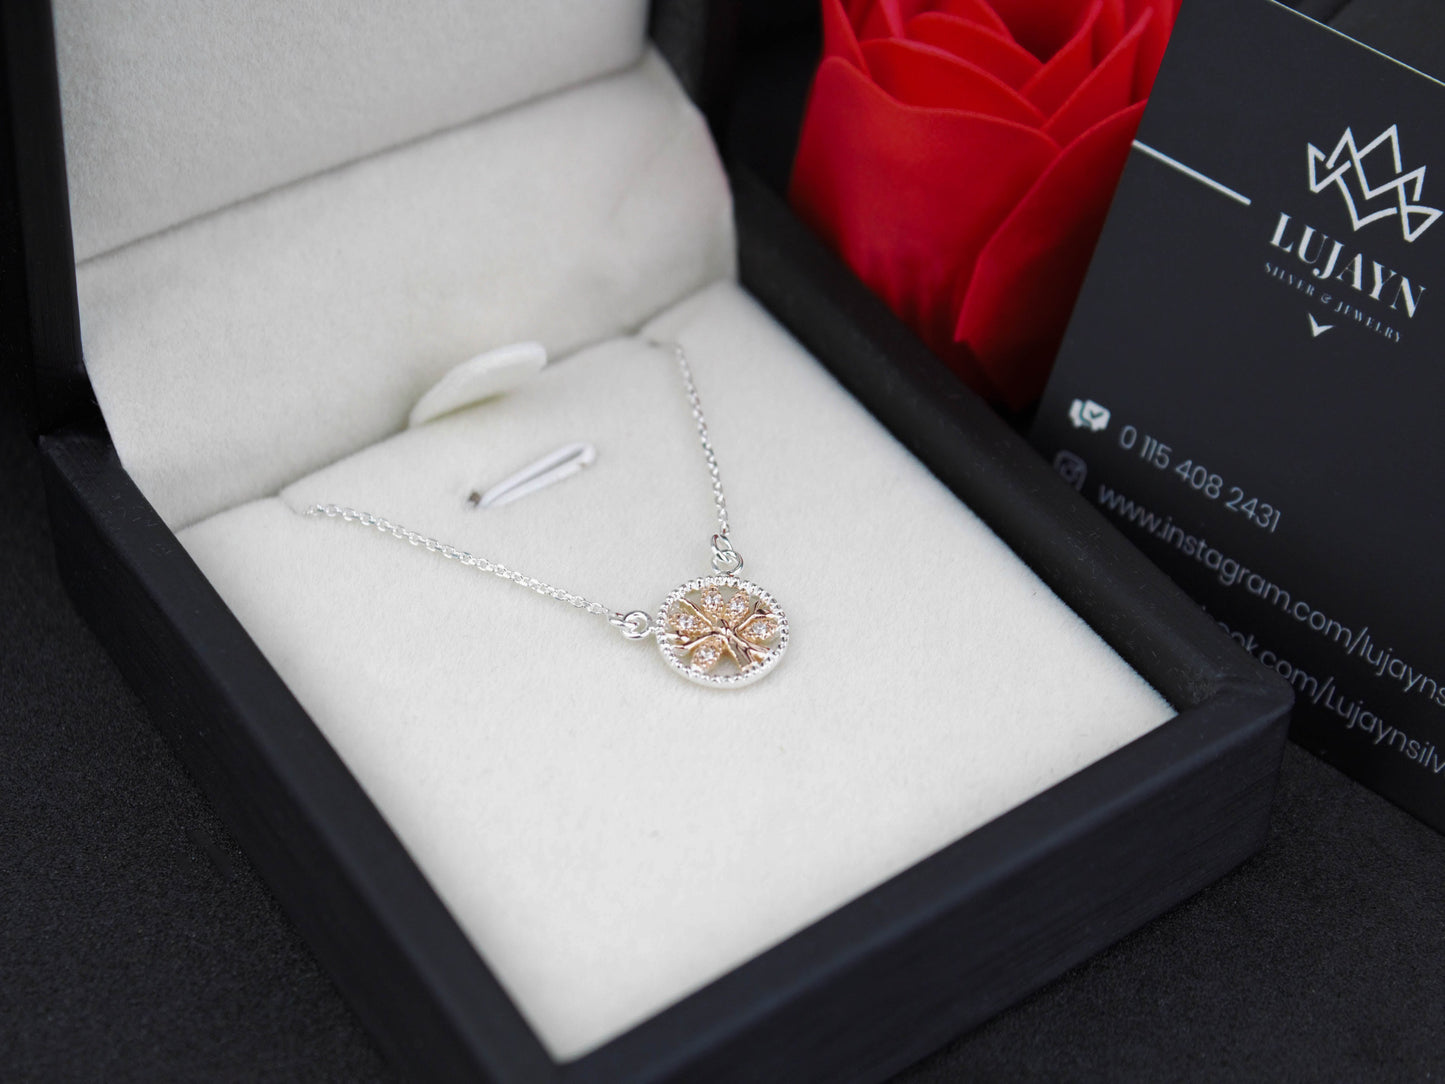 925 Sterling Silver Necklace with Premium Cubic Zirconia.